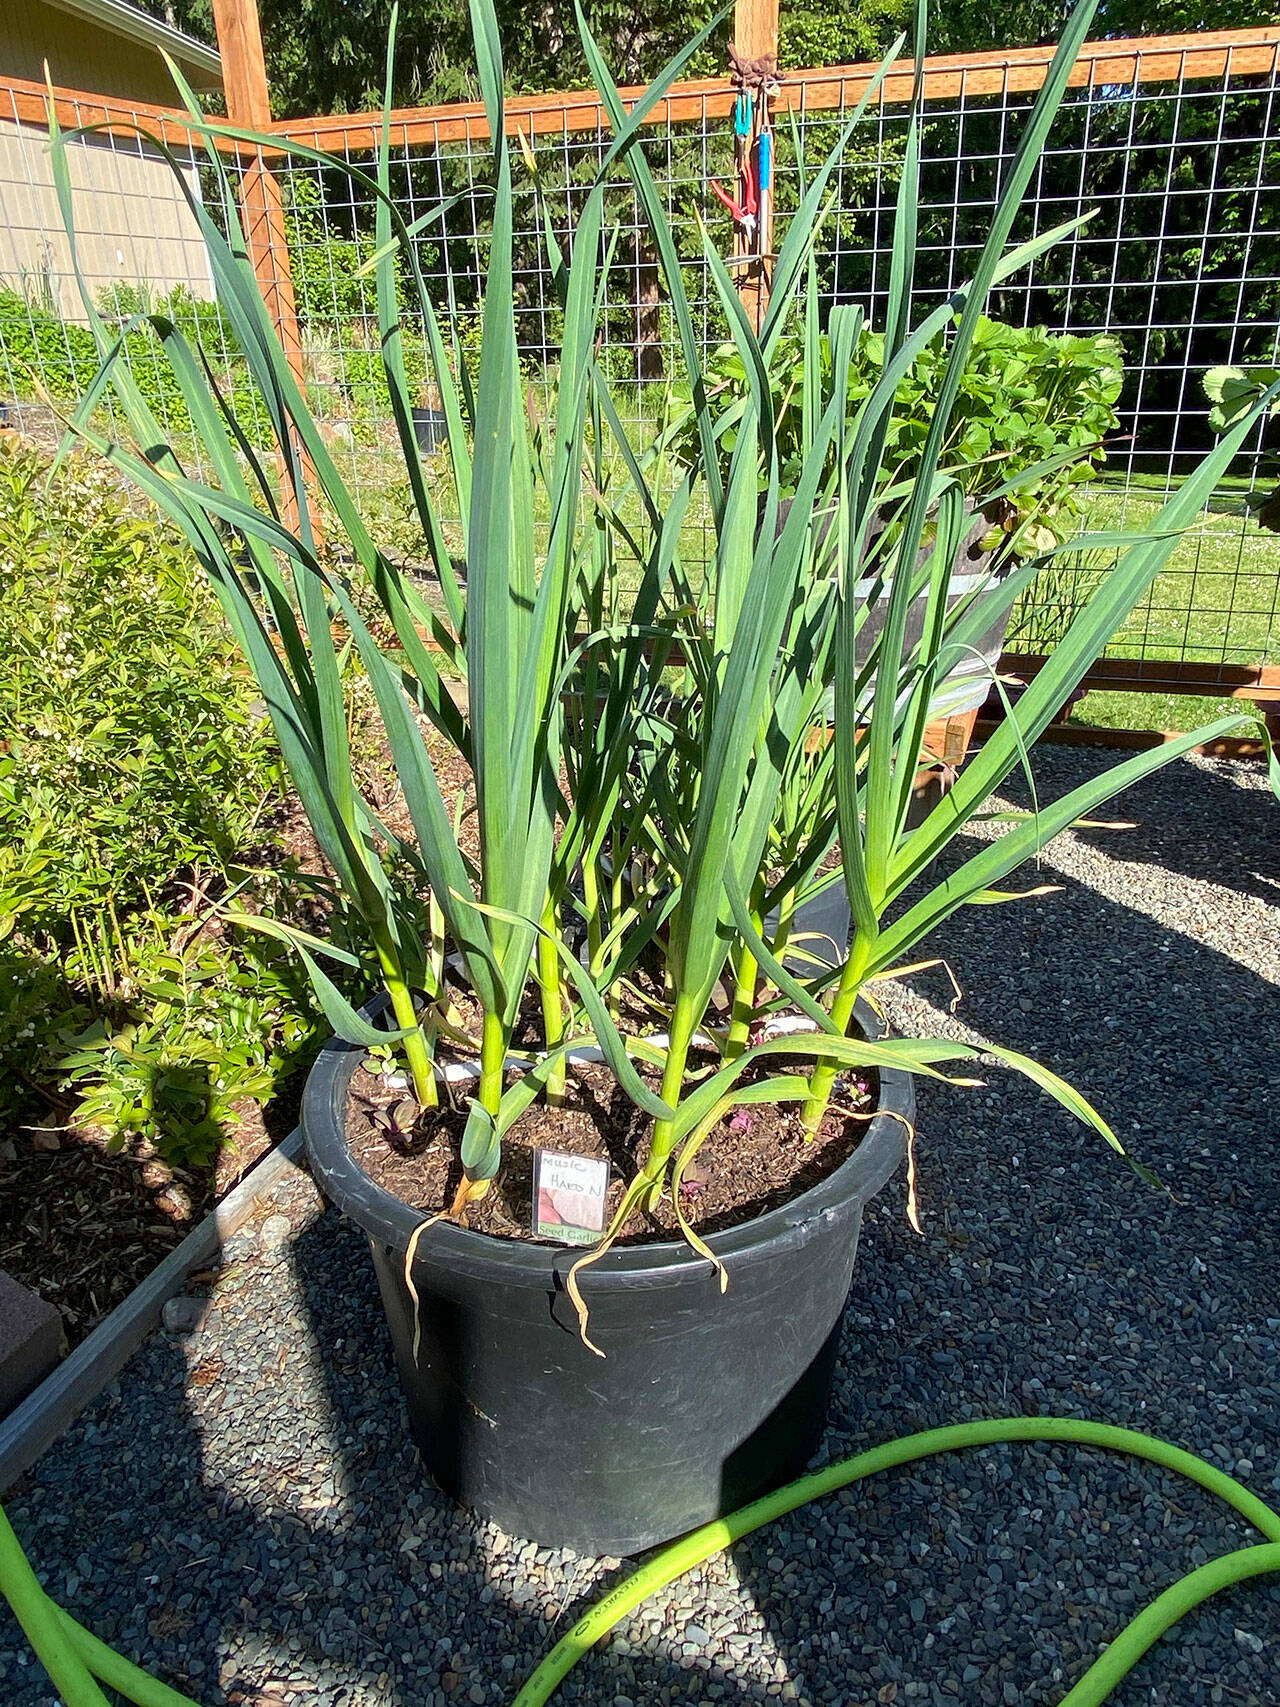 Fall is a great time to plant garlic in the ground or in containers, Master Gardeners say. Photo by Sandy Cortez